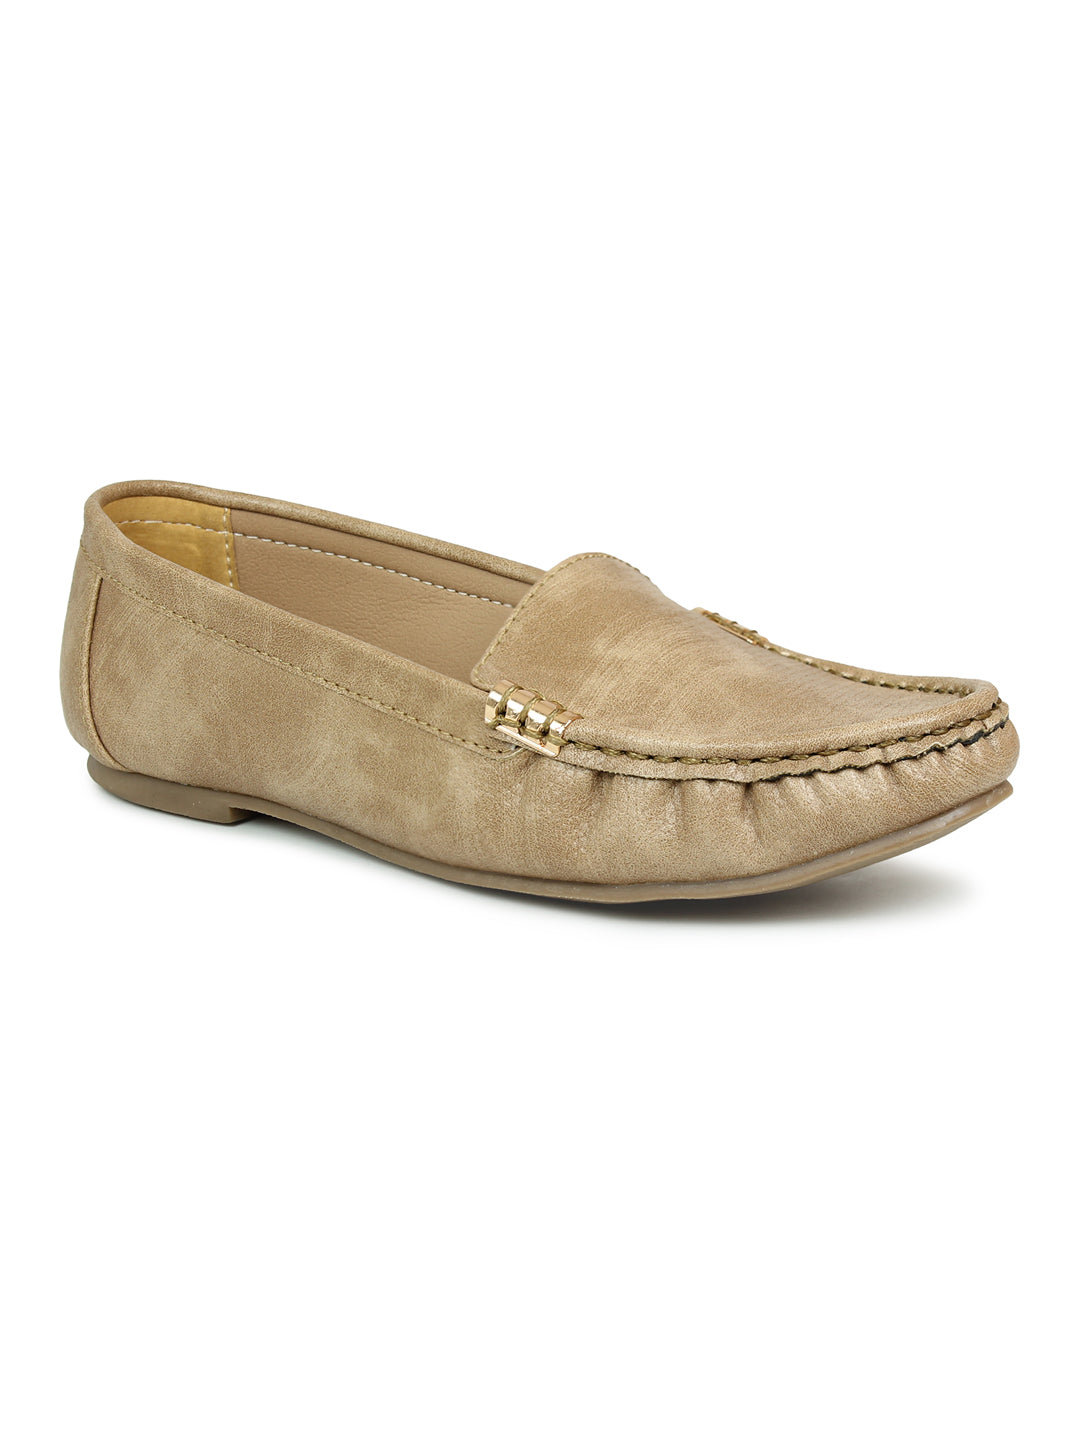 Faux Nubuck Moccasins With Side Metal Trim